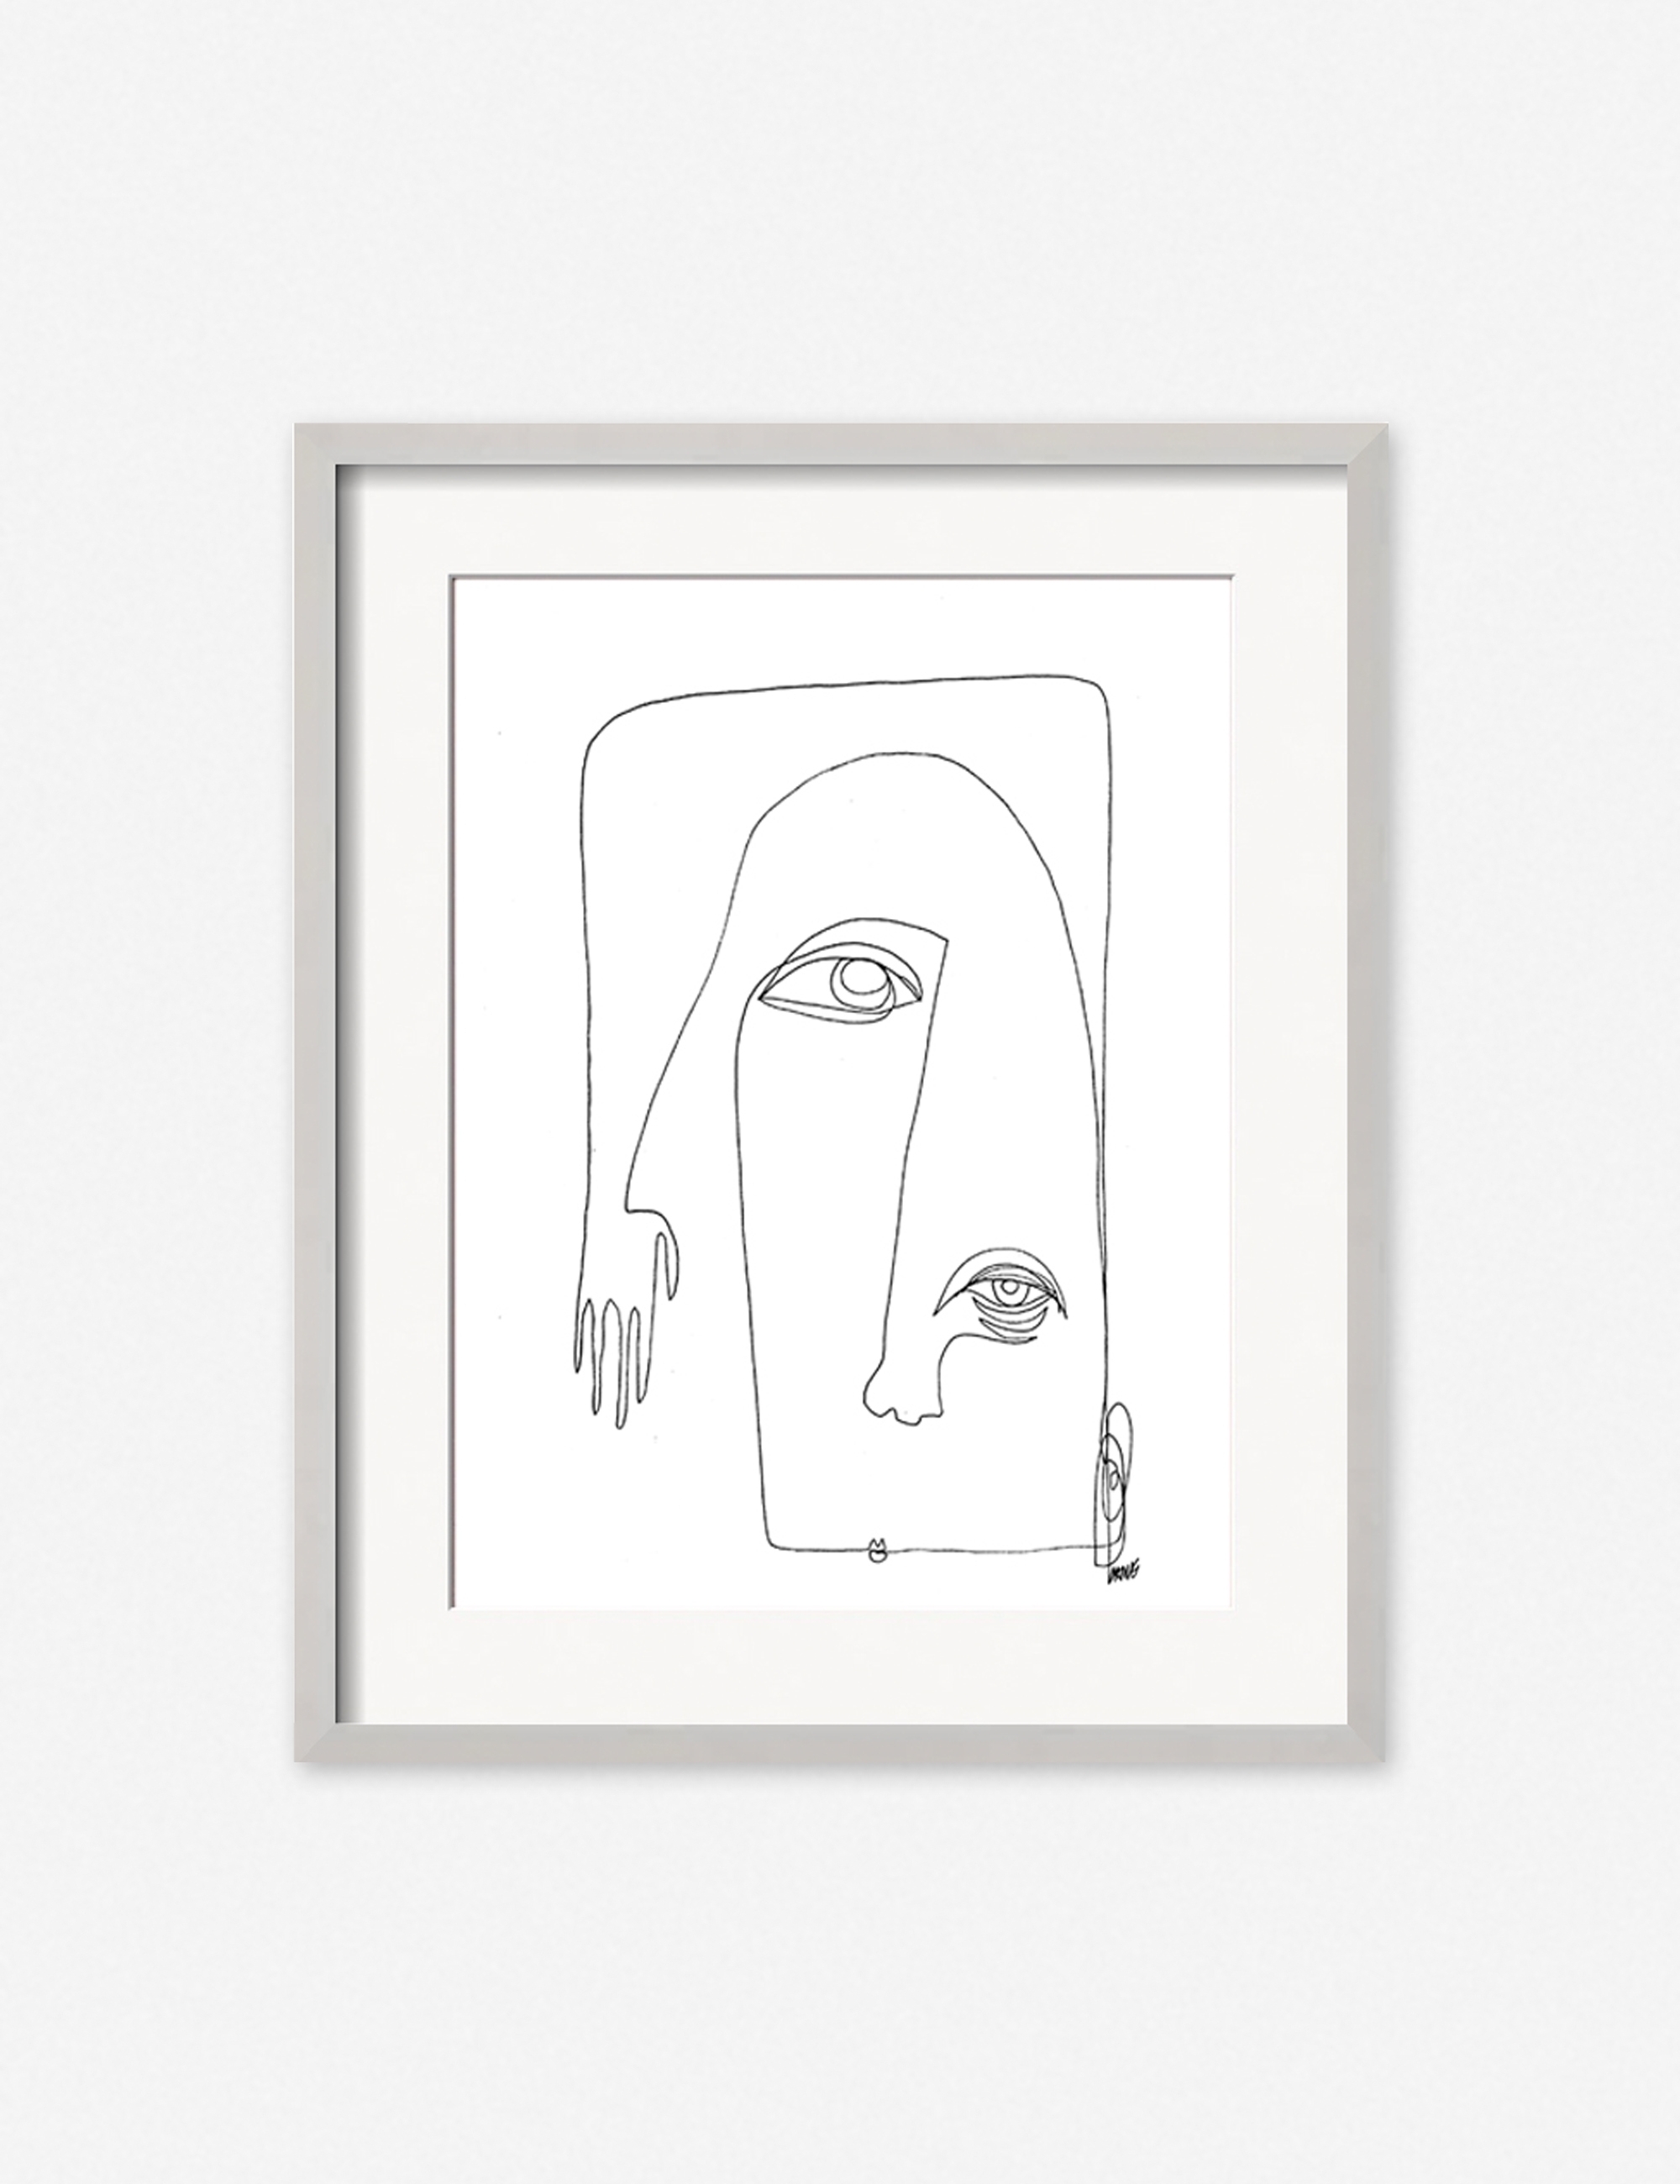 Picasso Print by Damienne Merlina - Image 5